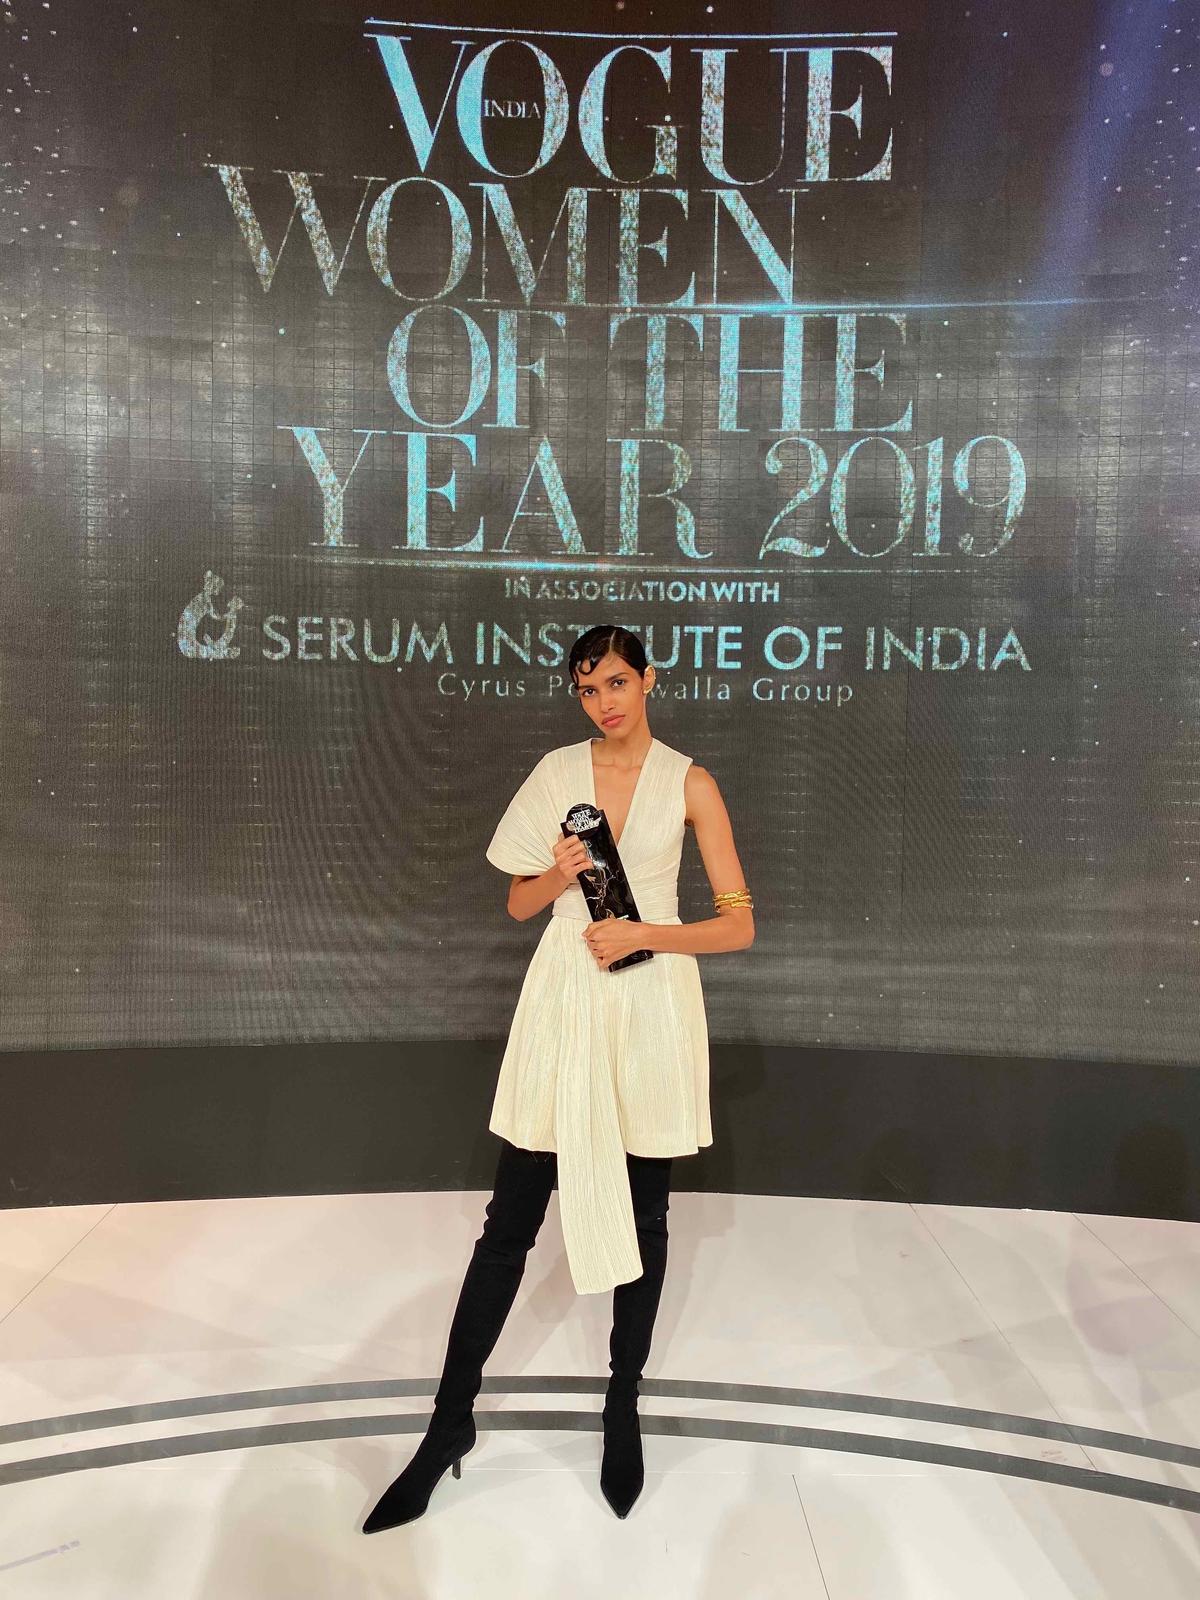 Supermodel Pooja Mor at the Vogue Women of The Year 2019 in Mumbai on Oct. 19, 2019. (Courtesy of Pooja Mor)